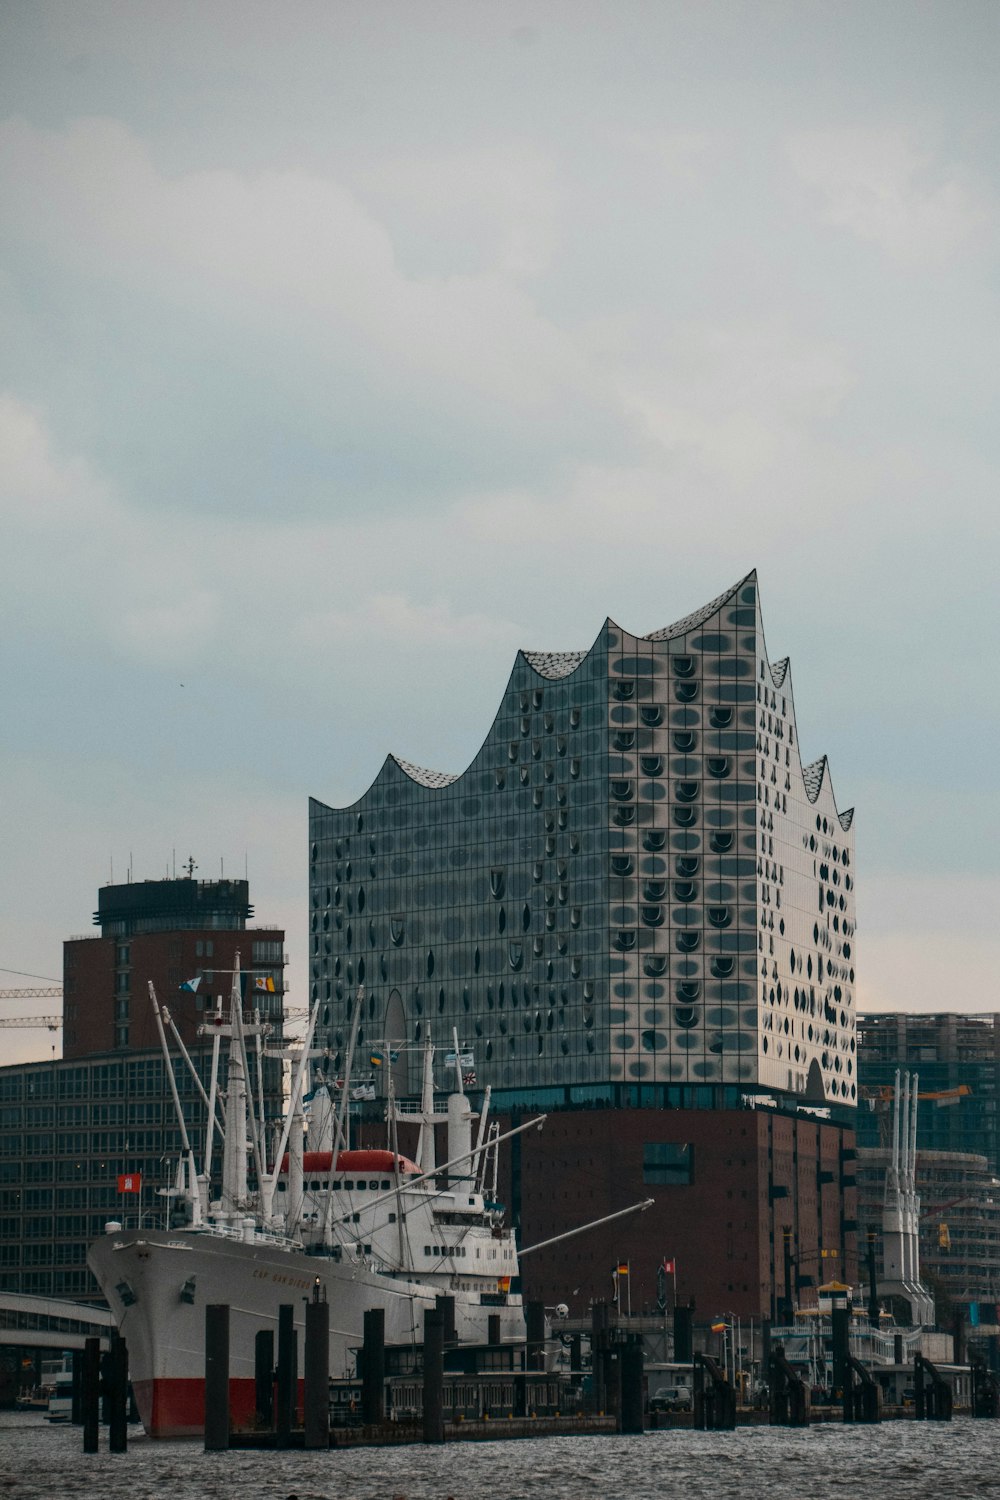 a large white boat sitting in a harbor next to a tall building